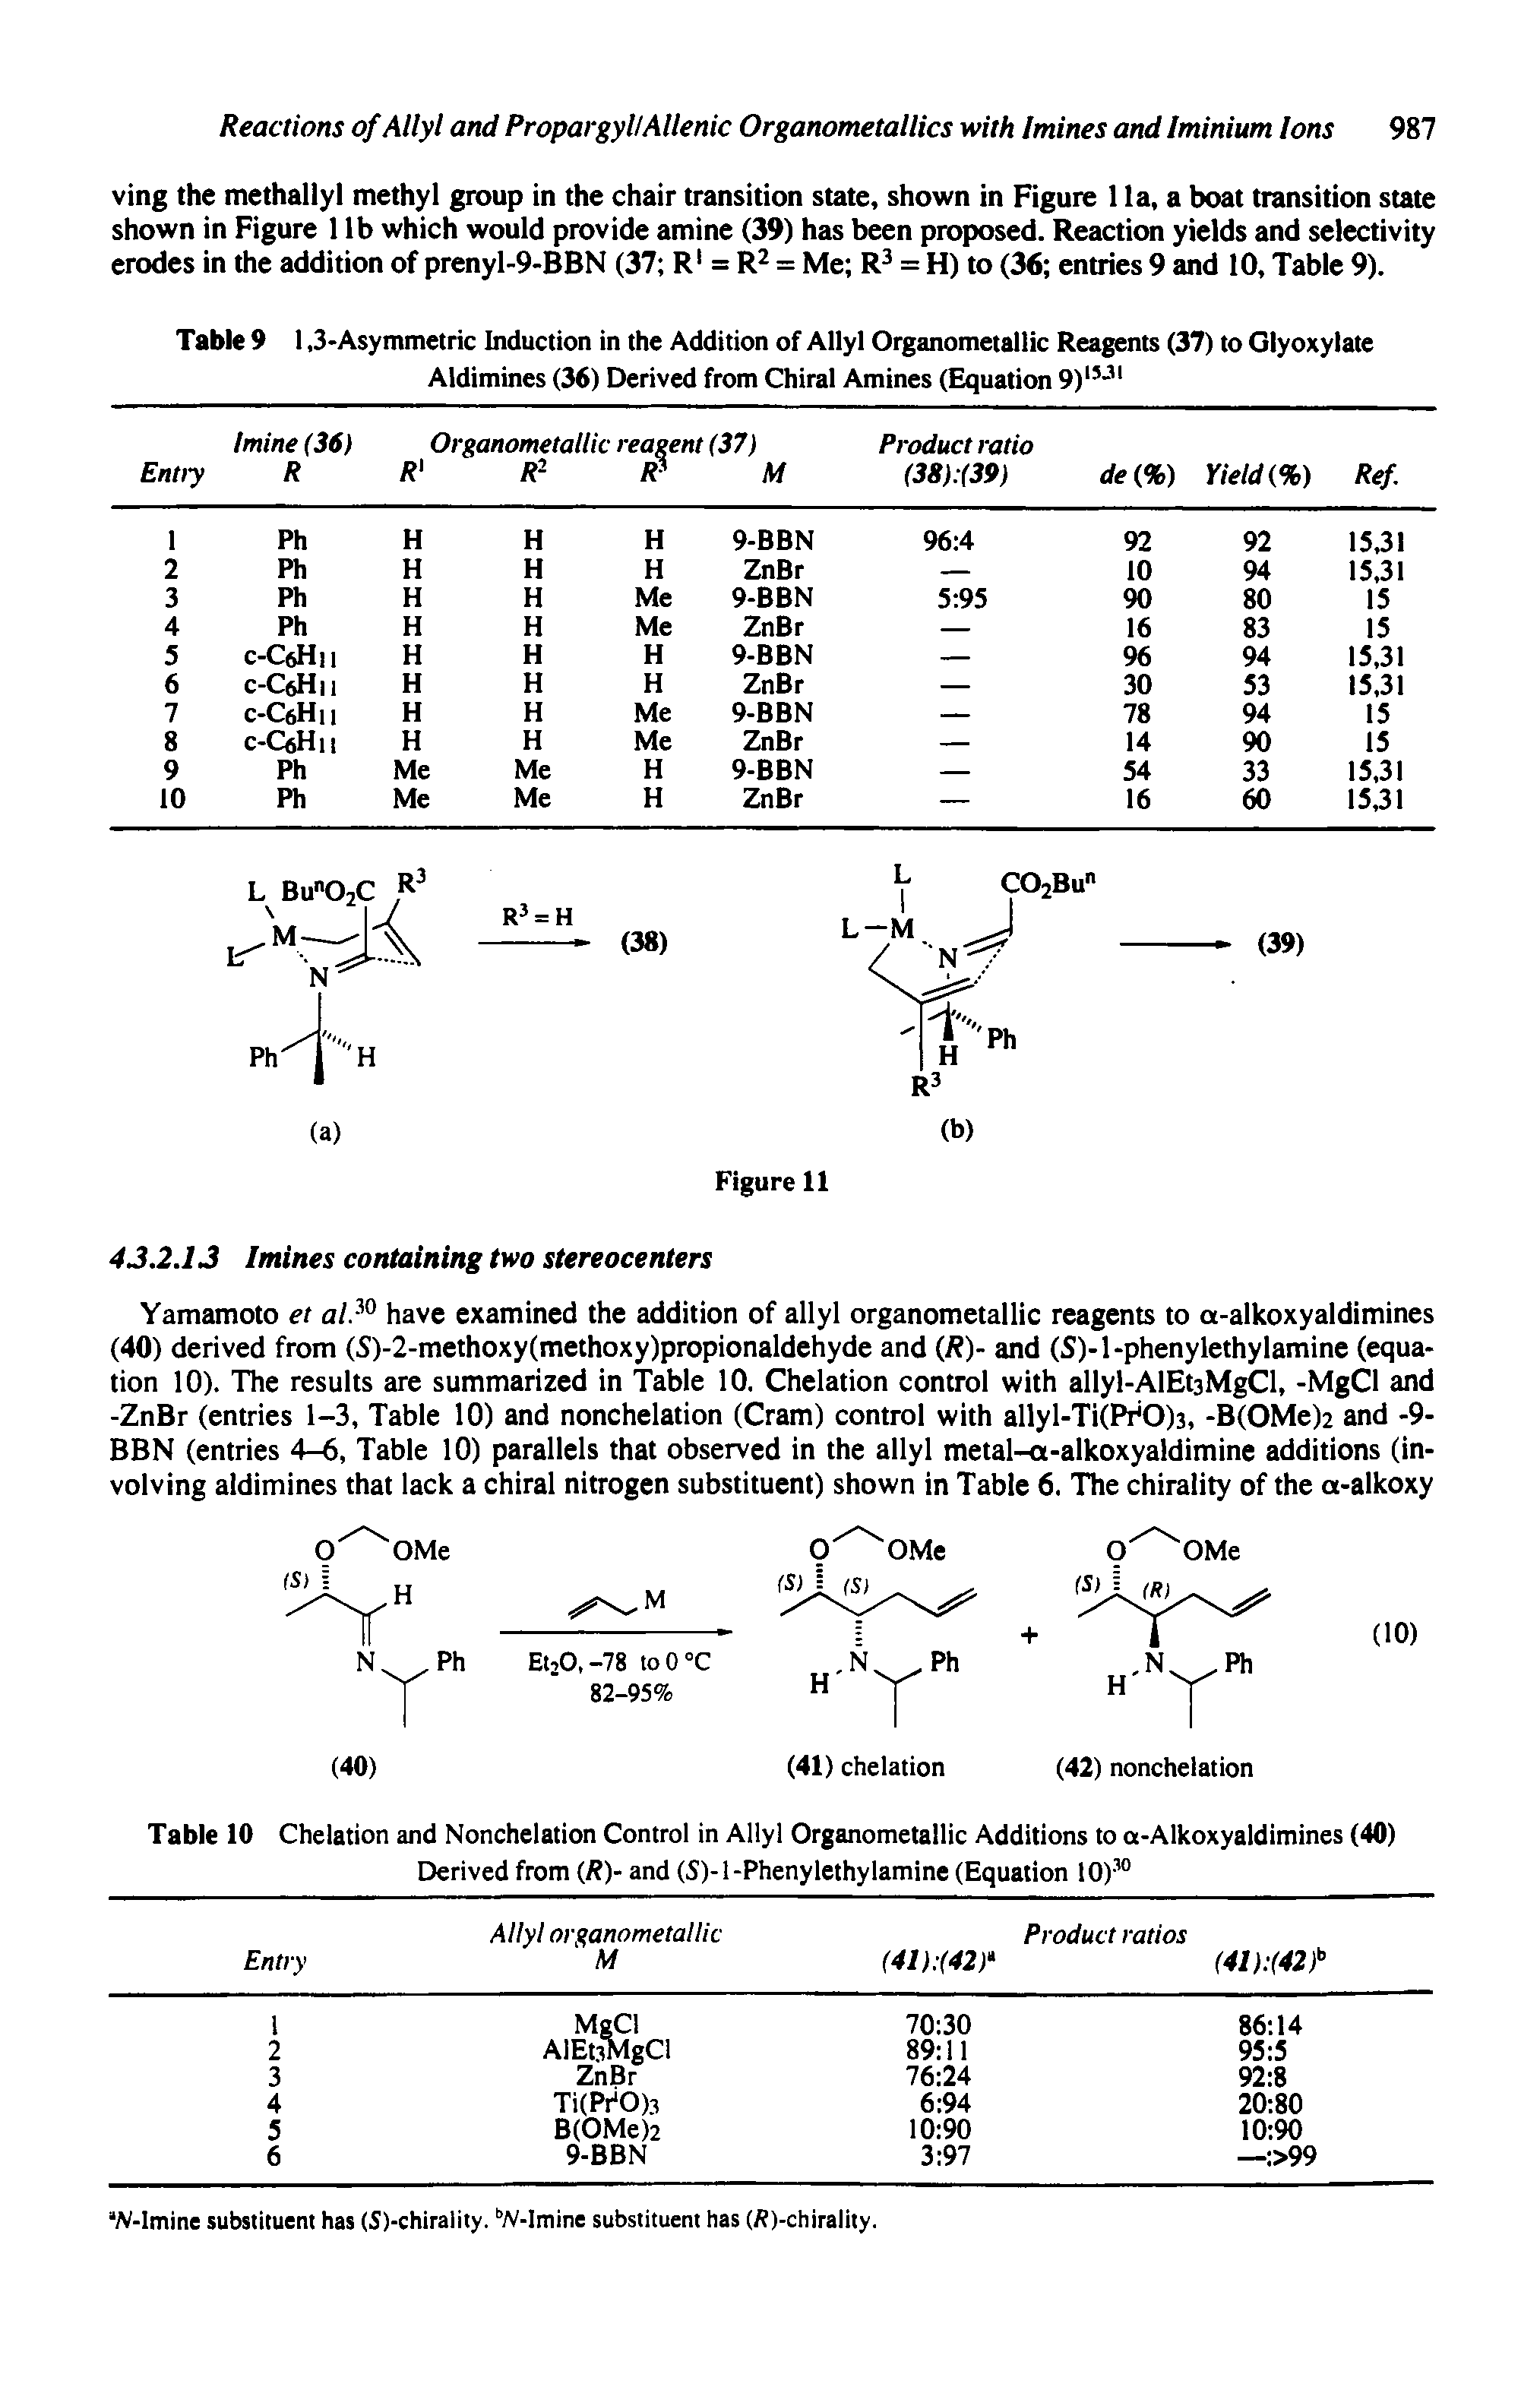 Table 9 1,3-Asymmetric Induction in the Addition of Allyl Organometallic Reagents (37) to Glyoxylate Aldimines (36) Derived from Chiral Amines (Equation 9) - ...